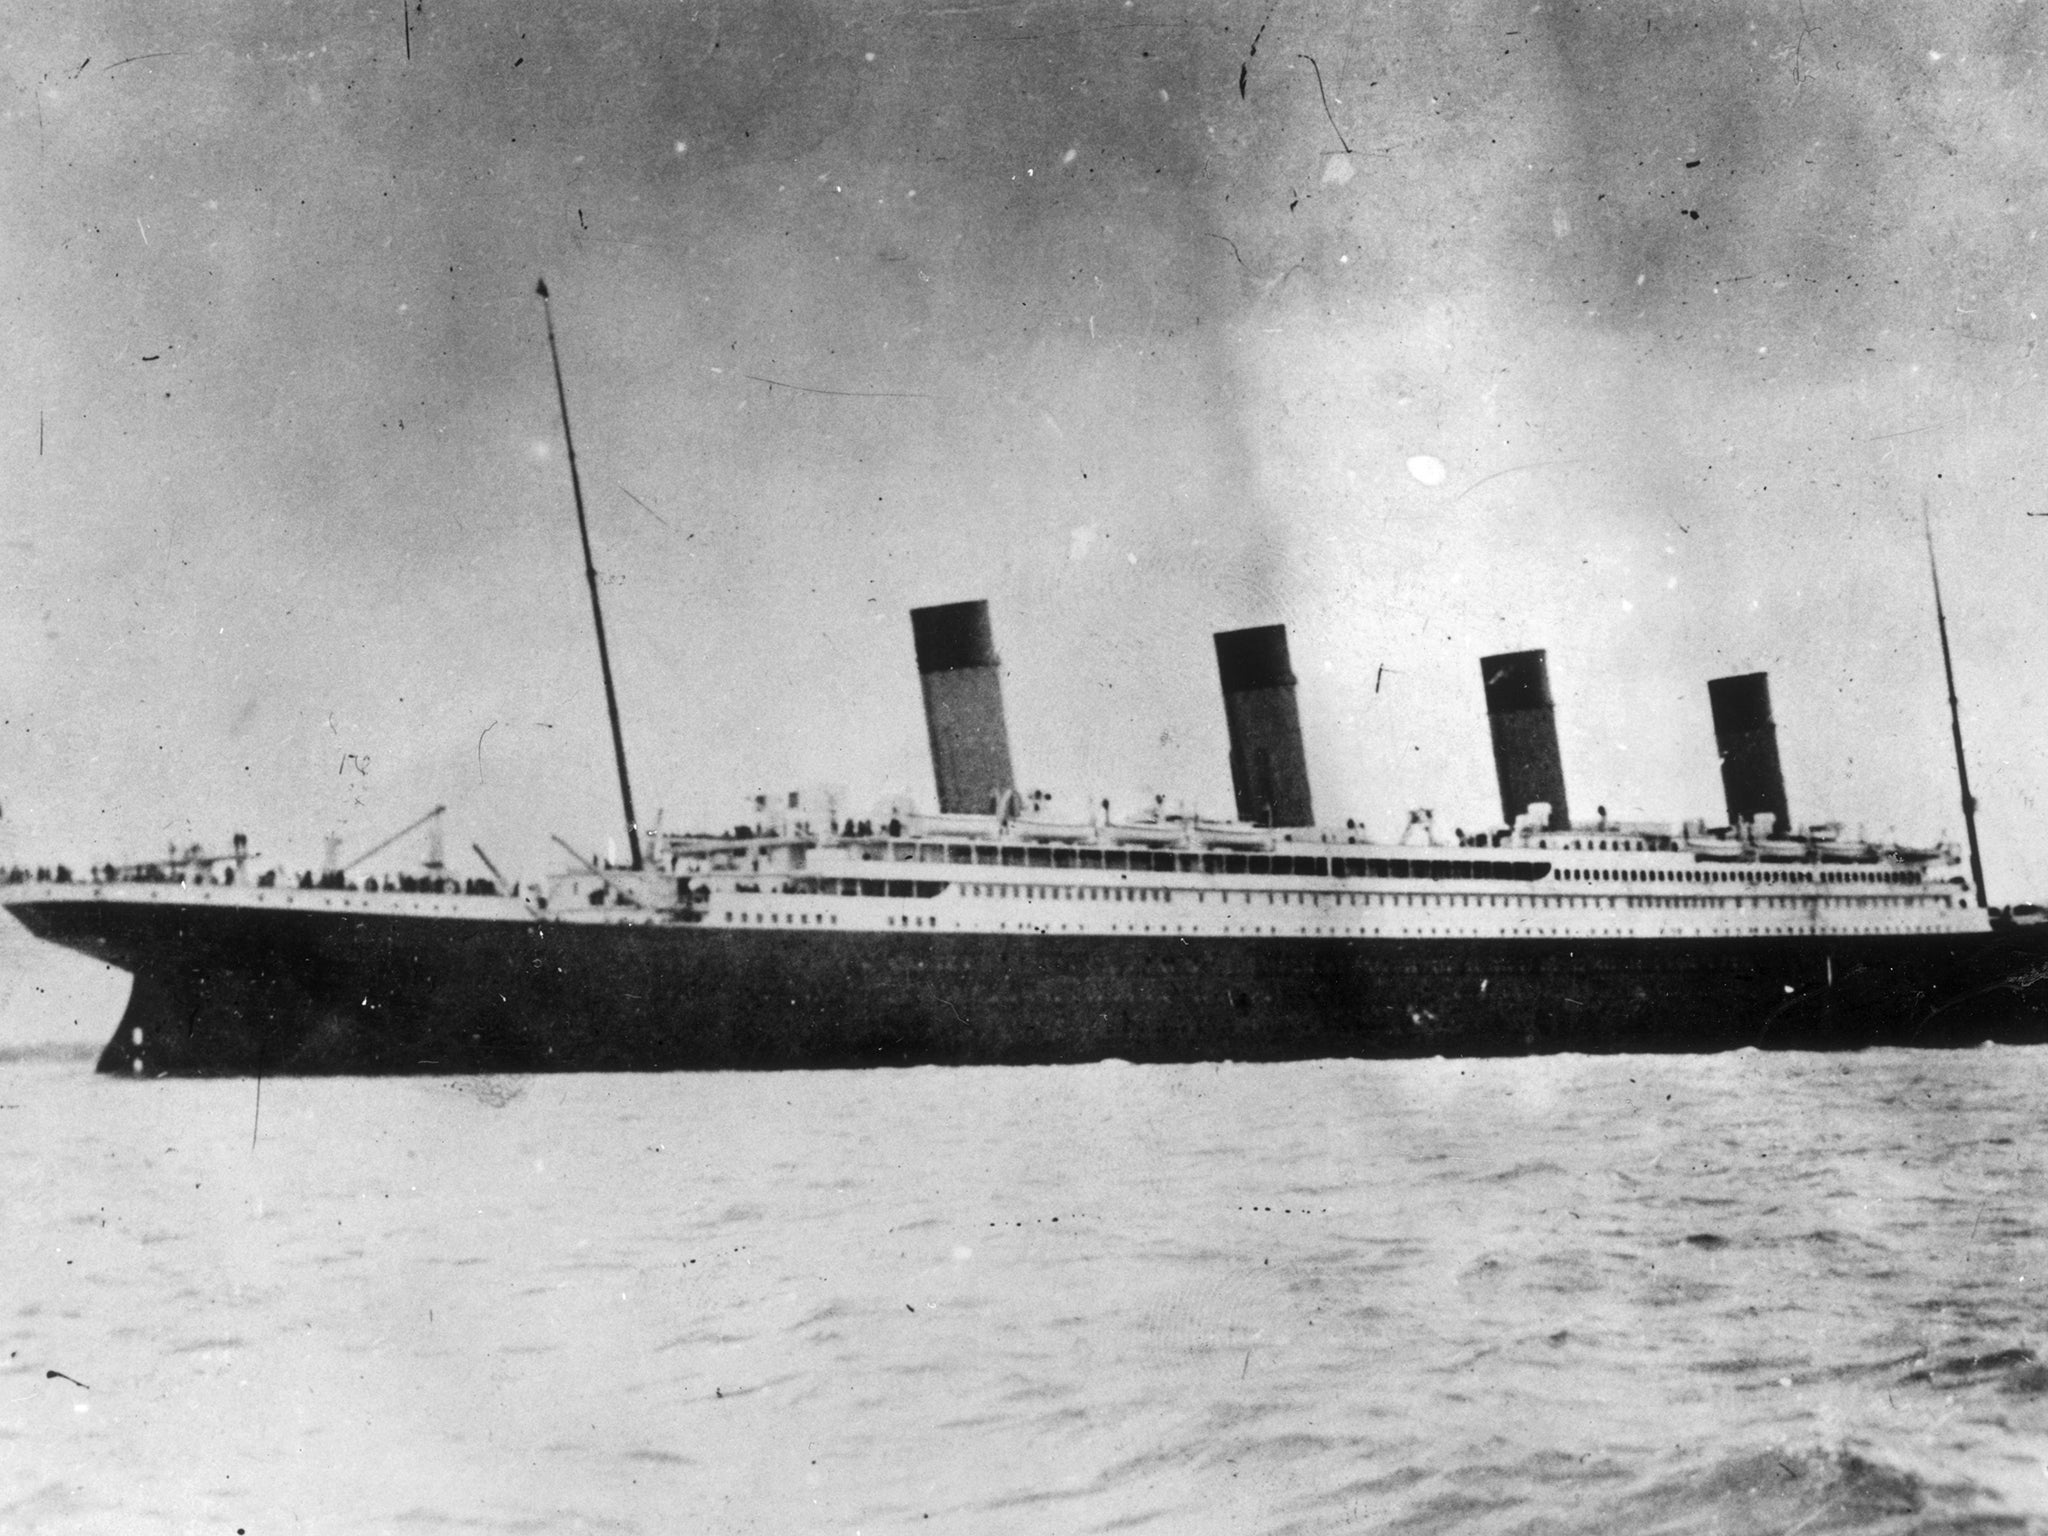 The RMS Titanic, which went down in 1912